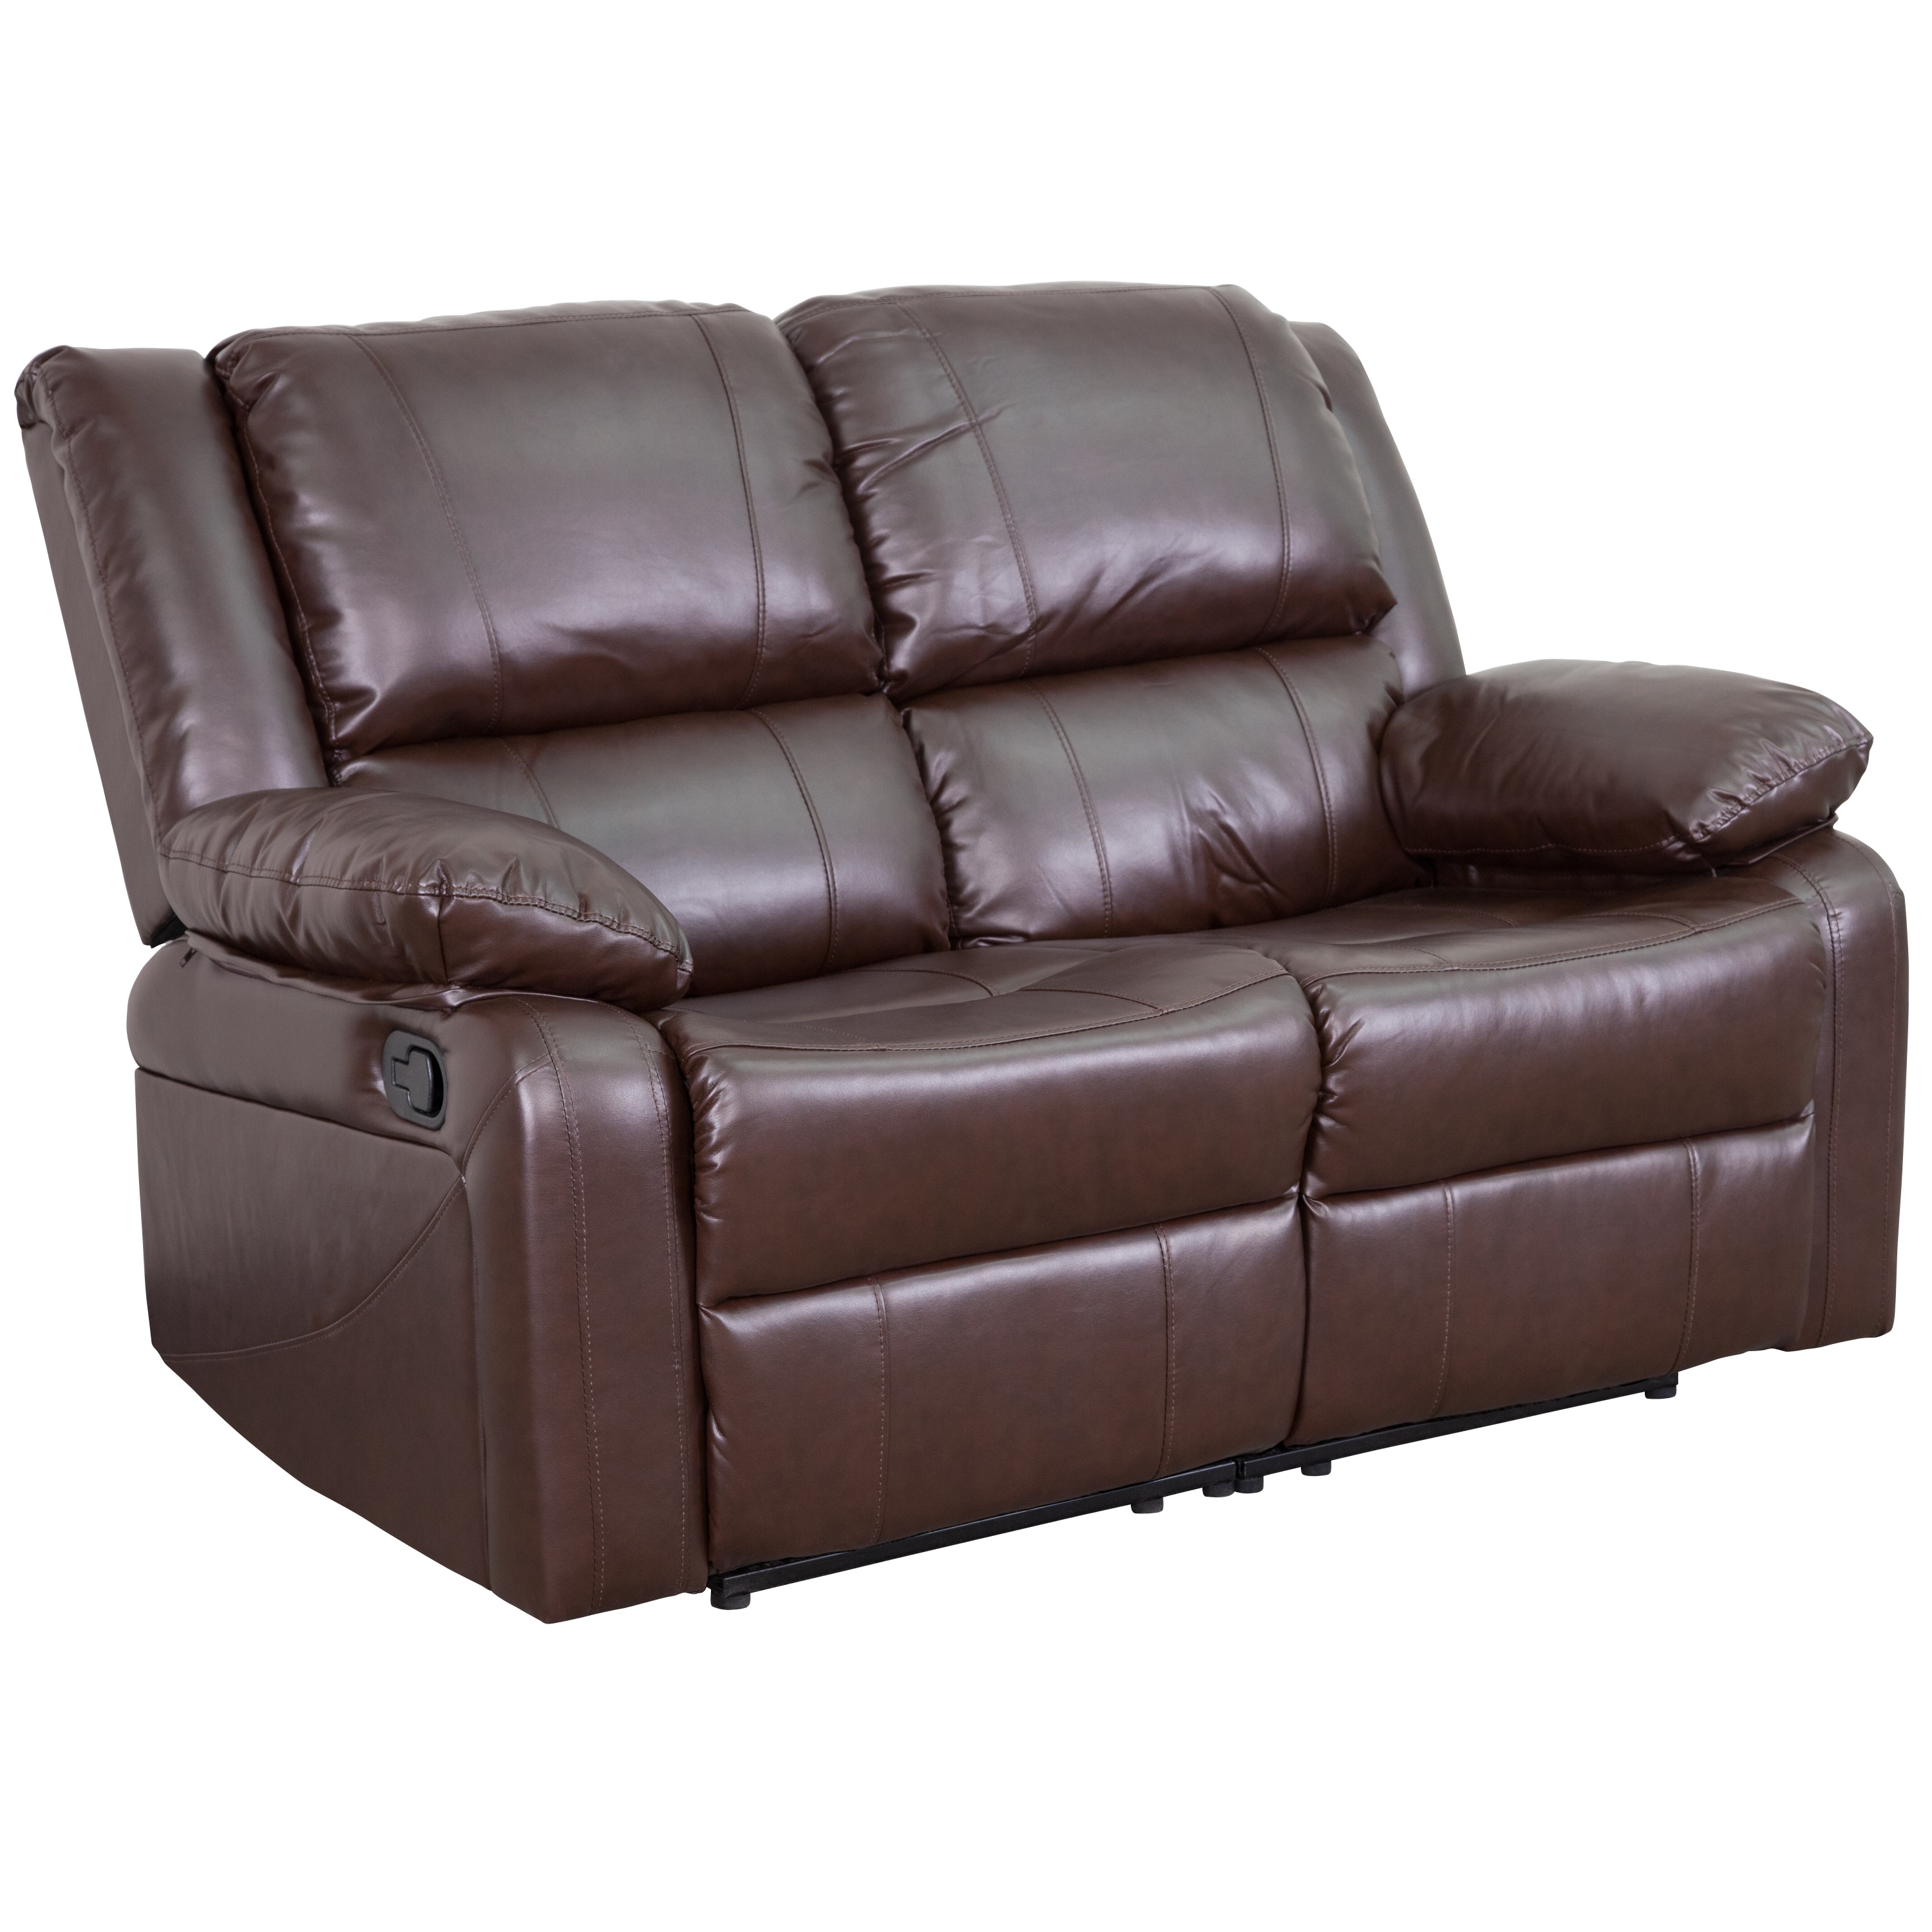 Faux Leather Reclining Loveseat, Dark Brown Leather Recliner Loveseat